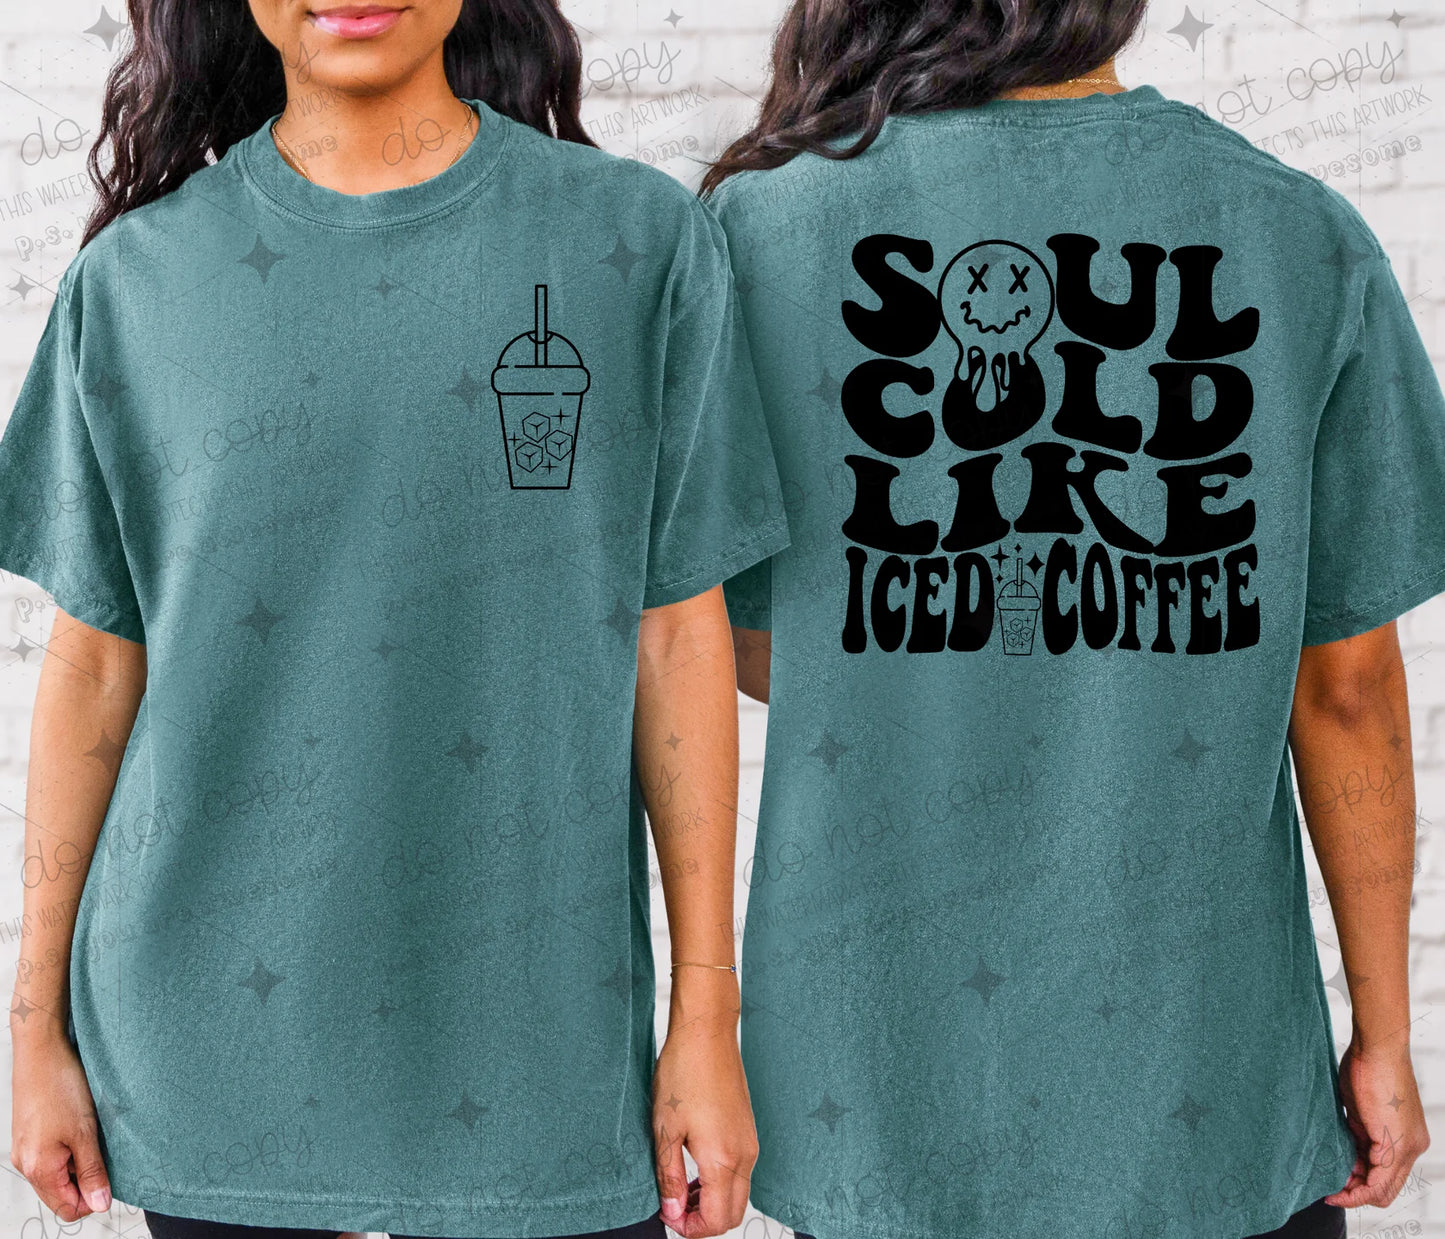 Soul cold like iced coffee *Ollie & Co. Exclusive*